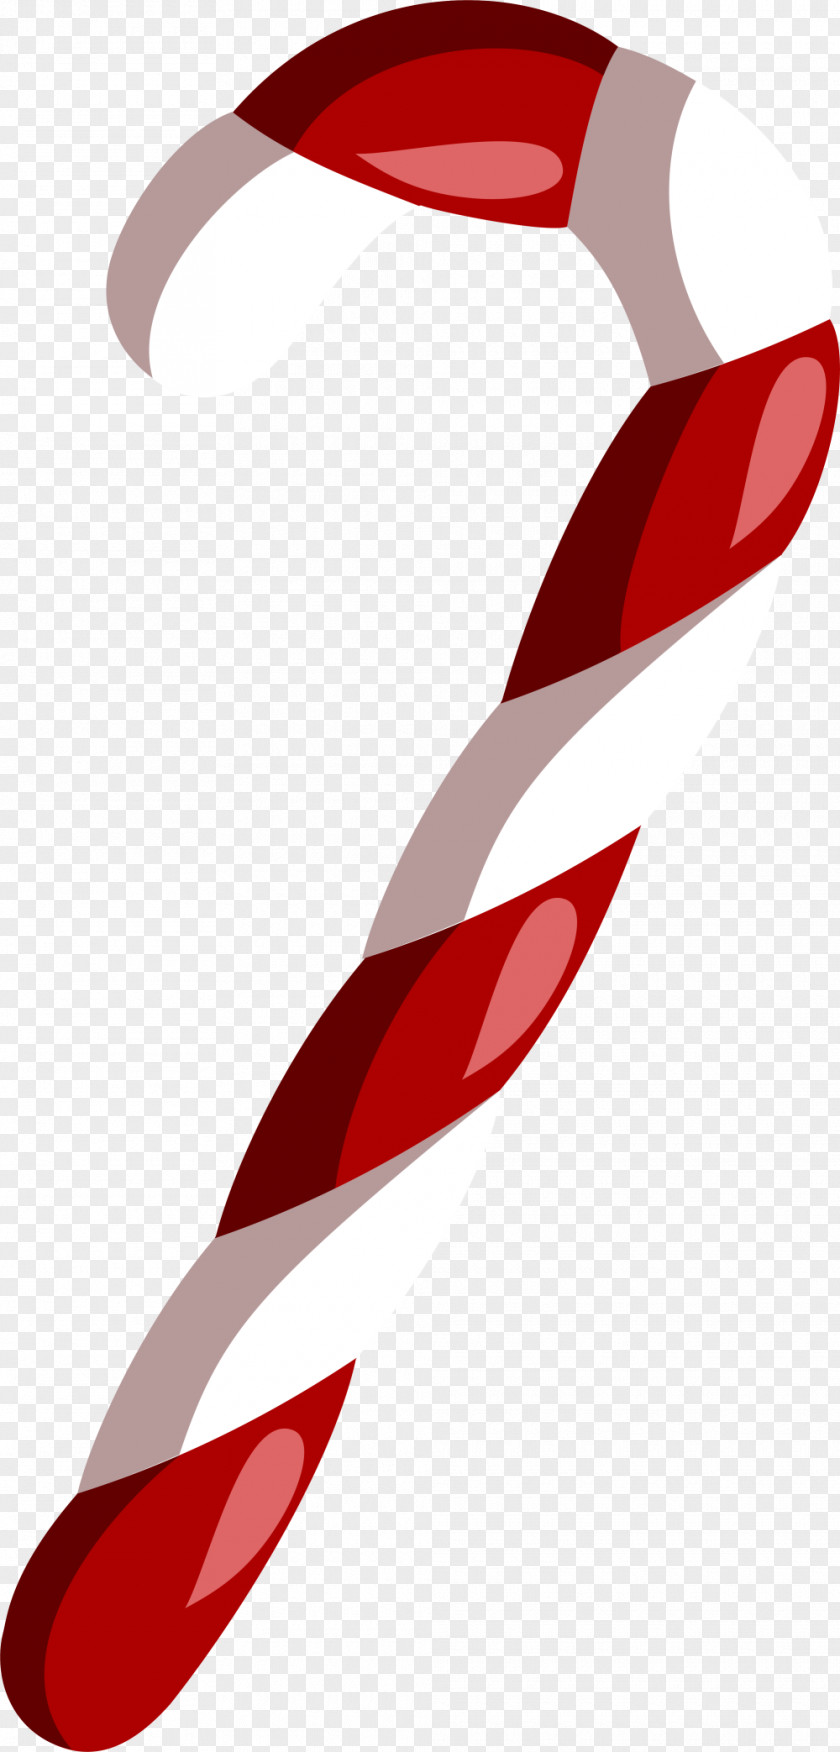 Simple And Colorful Candy Stick Dessert PNG